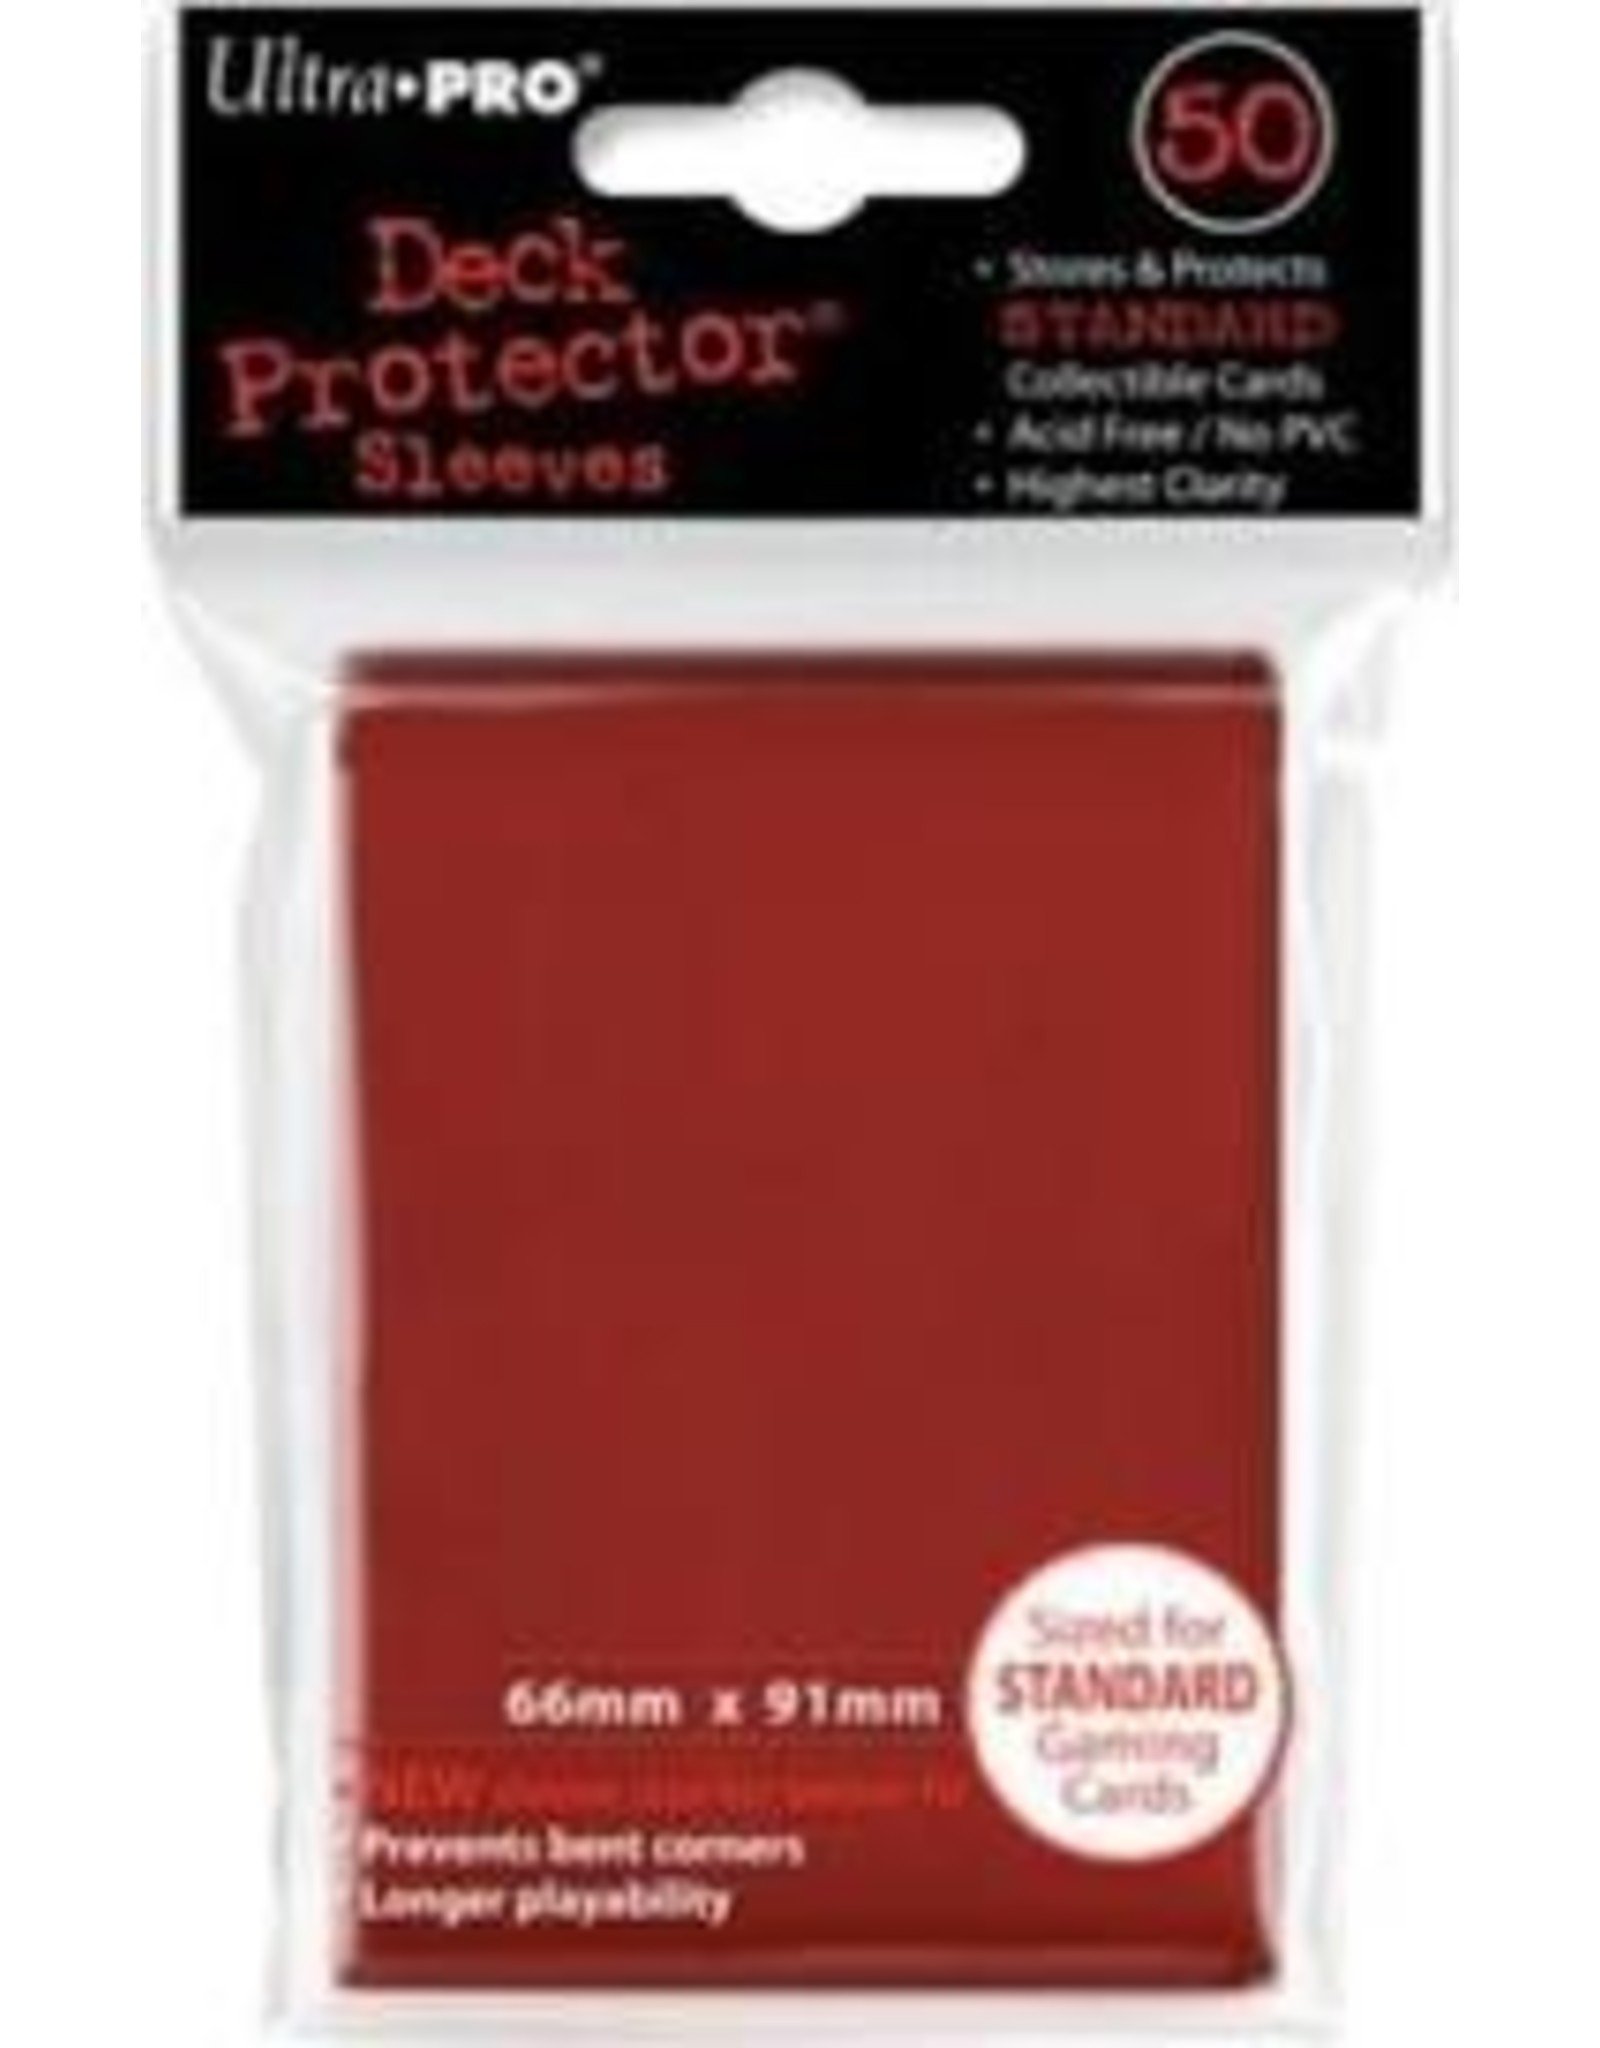 Ultra Pro Deck Protector: New Standard RD (50ct)